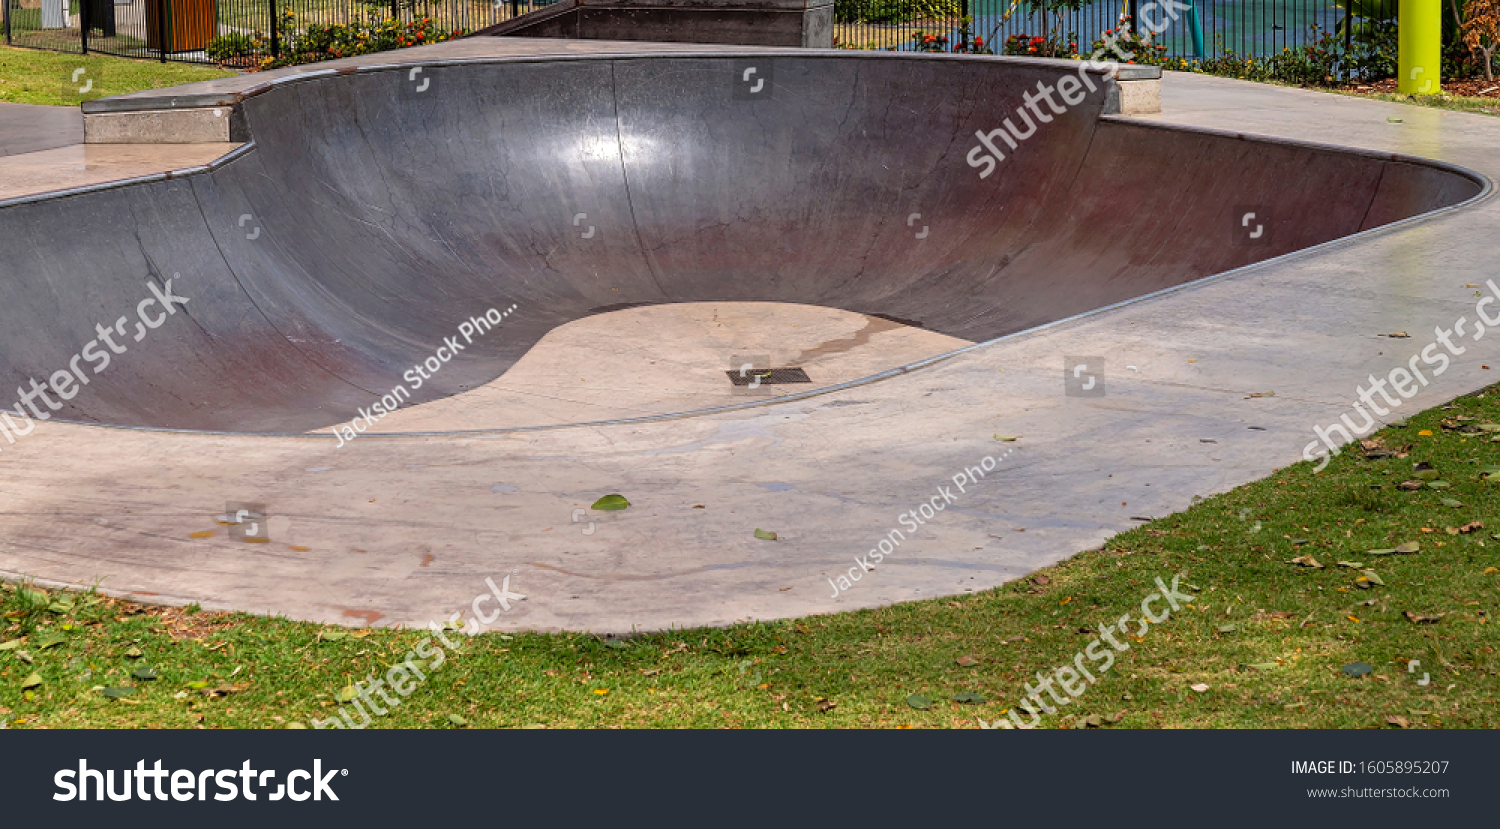 Capricorn Coast Australia - A skate park for recreational skateboarding built as an activity for young people to enjoy #1605895207